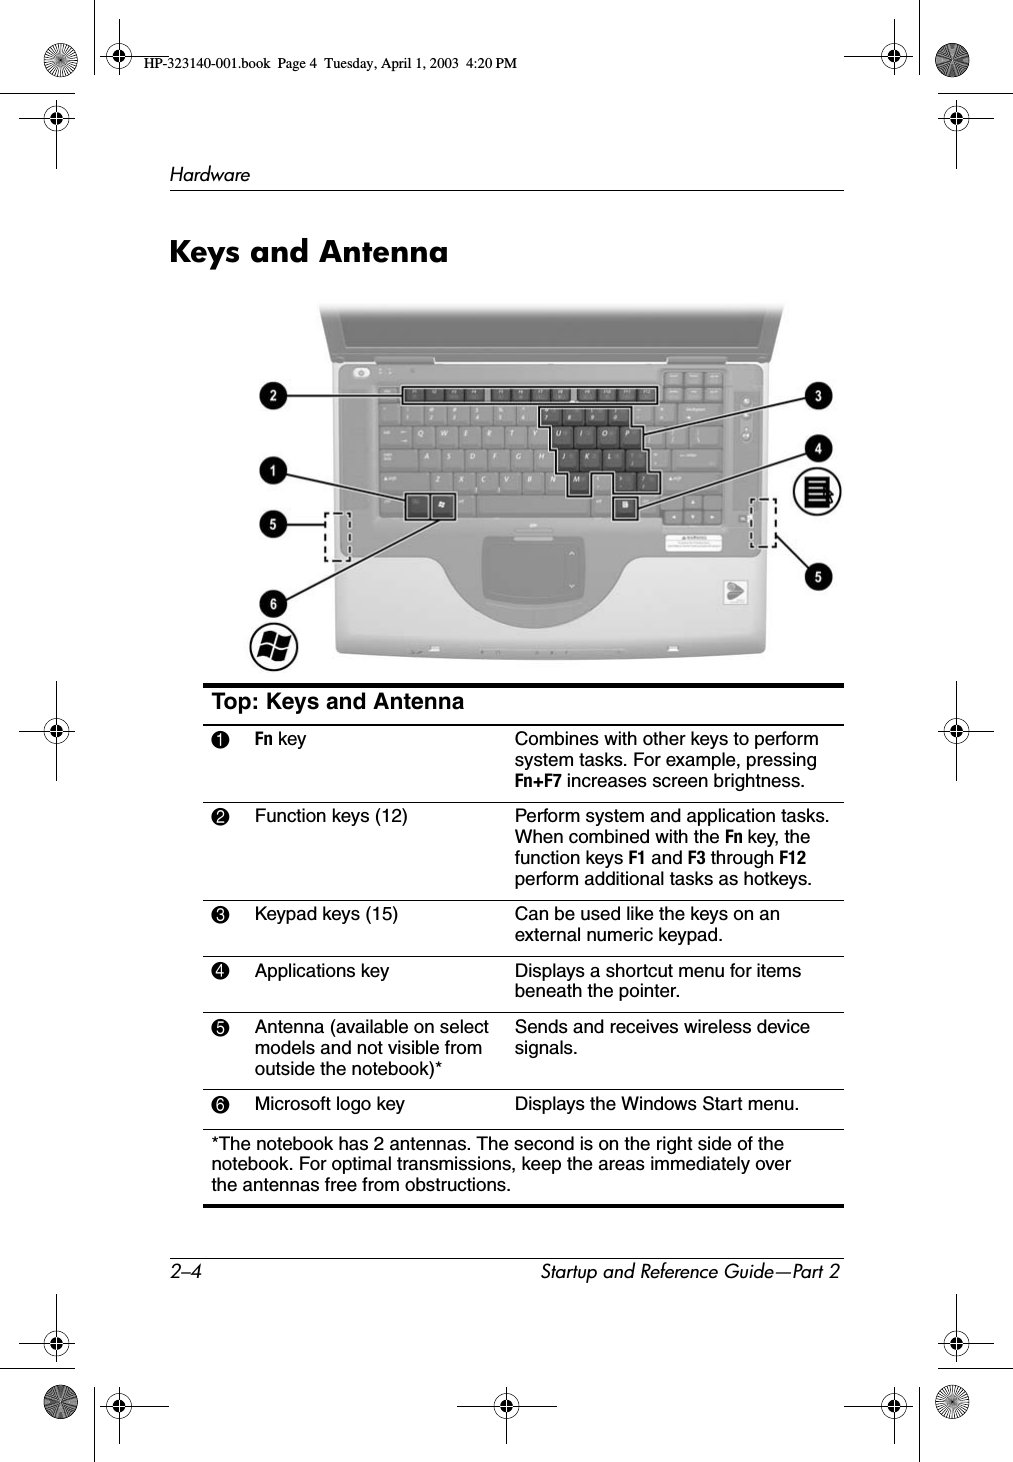 2–4 Startup and Reference Guide—Part 2HardwareKeys and AntennaTop: Keys and Antenna1Fn key Combines with other keys to perform system tasks. For example, pressing Fn+F7 increases screen brightness.2Function keys (12) Perform system and application tasks. When combined with the Fn key, the function keys F1 and F3 through F12perform additional tasks as hotkeys.3Keypad keys (15) Can be used like the keys on an external numeric keypad.4Applications key Displays a shortcut menu for items beneath the pointer.5Antenna (available on select models and not visible from outside the notebook)*Sends and receives wireless device signals.6Microsoft logo key Displays the Windows Start menu.*The notebook has 2 antennas. The second is on the right side of the notebook. For optimal transmissions, keep the areas immediately over the antennas free from obstructions. HP-323140-001.book  Page 4  Tuesday, April 1, 2003  4:20 PM